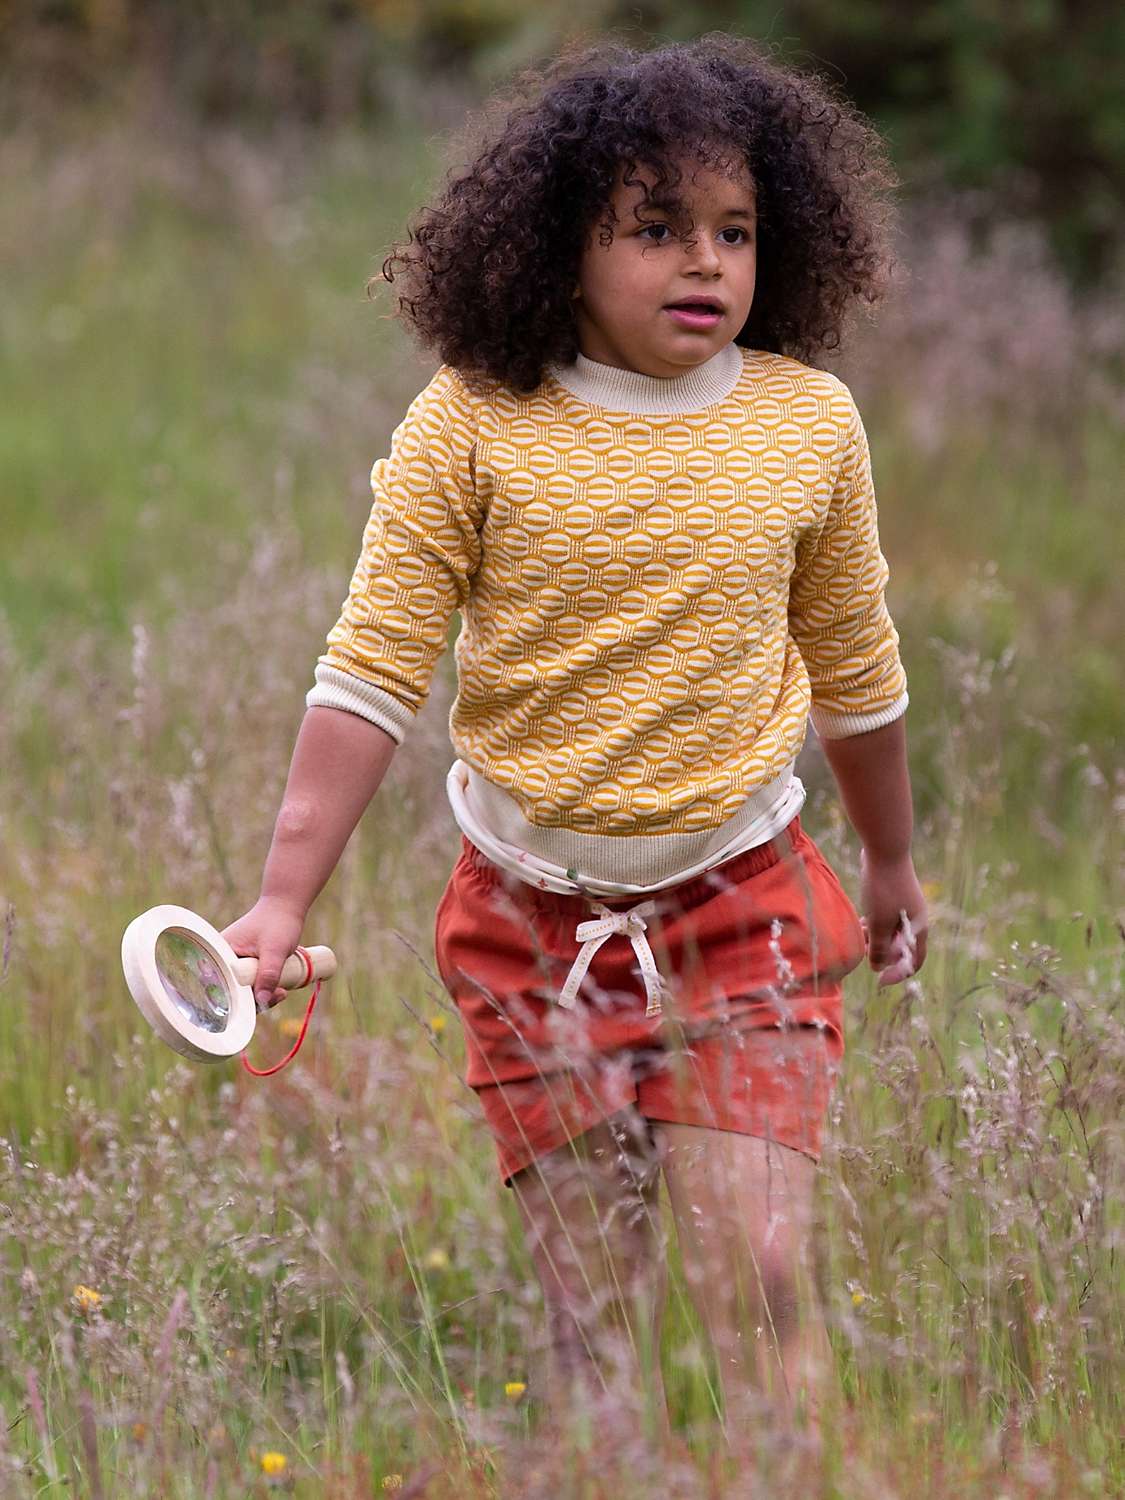 Buy Little Green Radicals Baby From One To Another Ripple Knit Jumper, Yellow Online at johnlewis.com